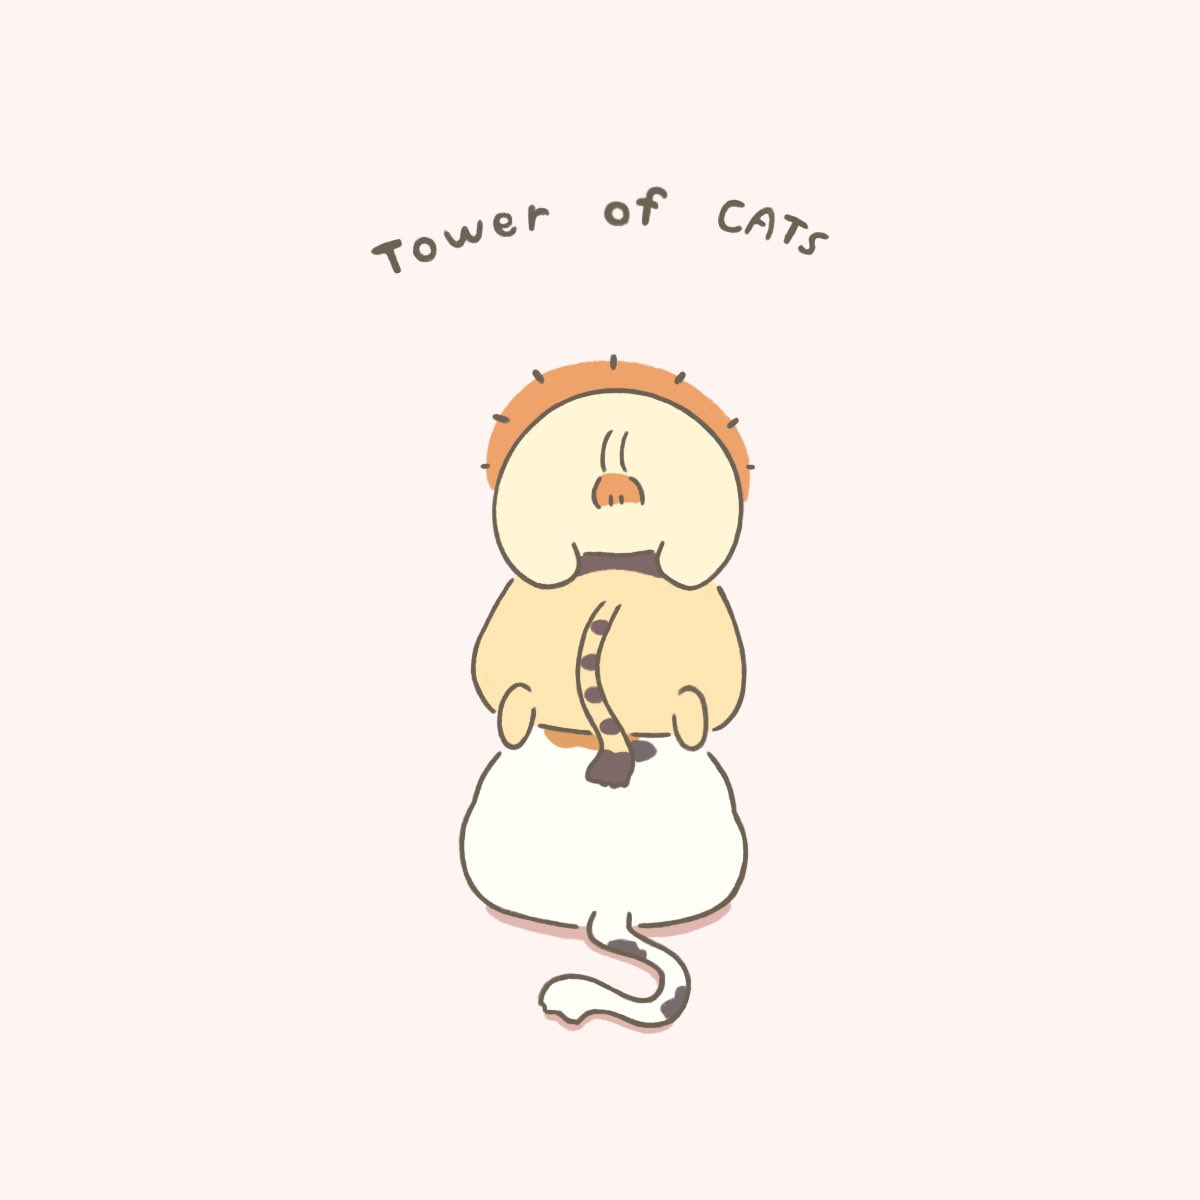 A tower of 3 cats